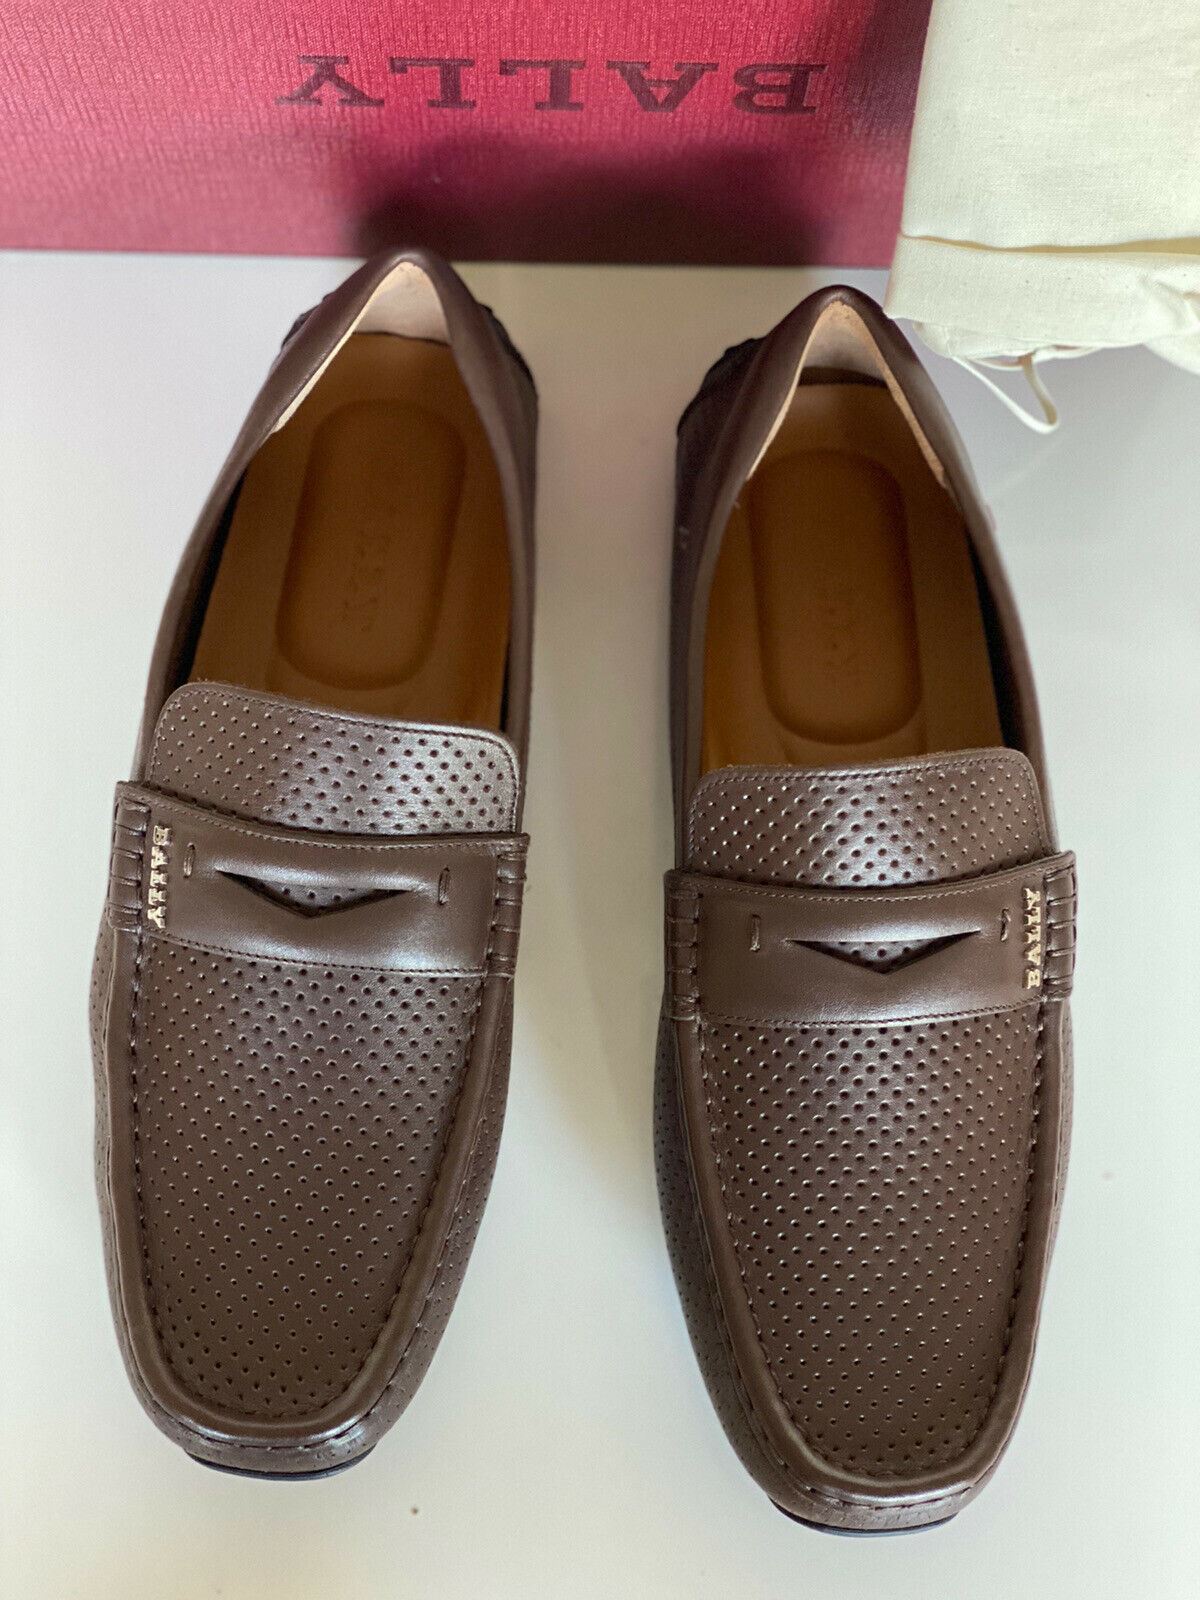 NIB Bally Perforated Men's Calf Leather Driver Loafers Coconut 11.5 D US 6231354